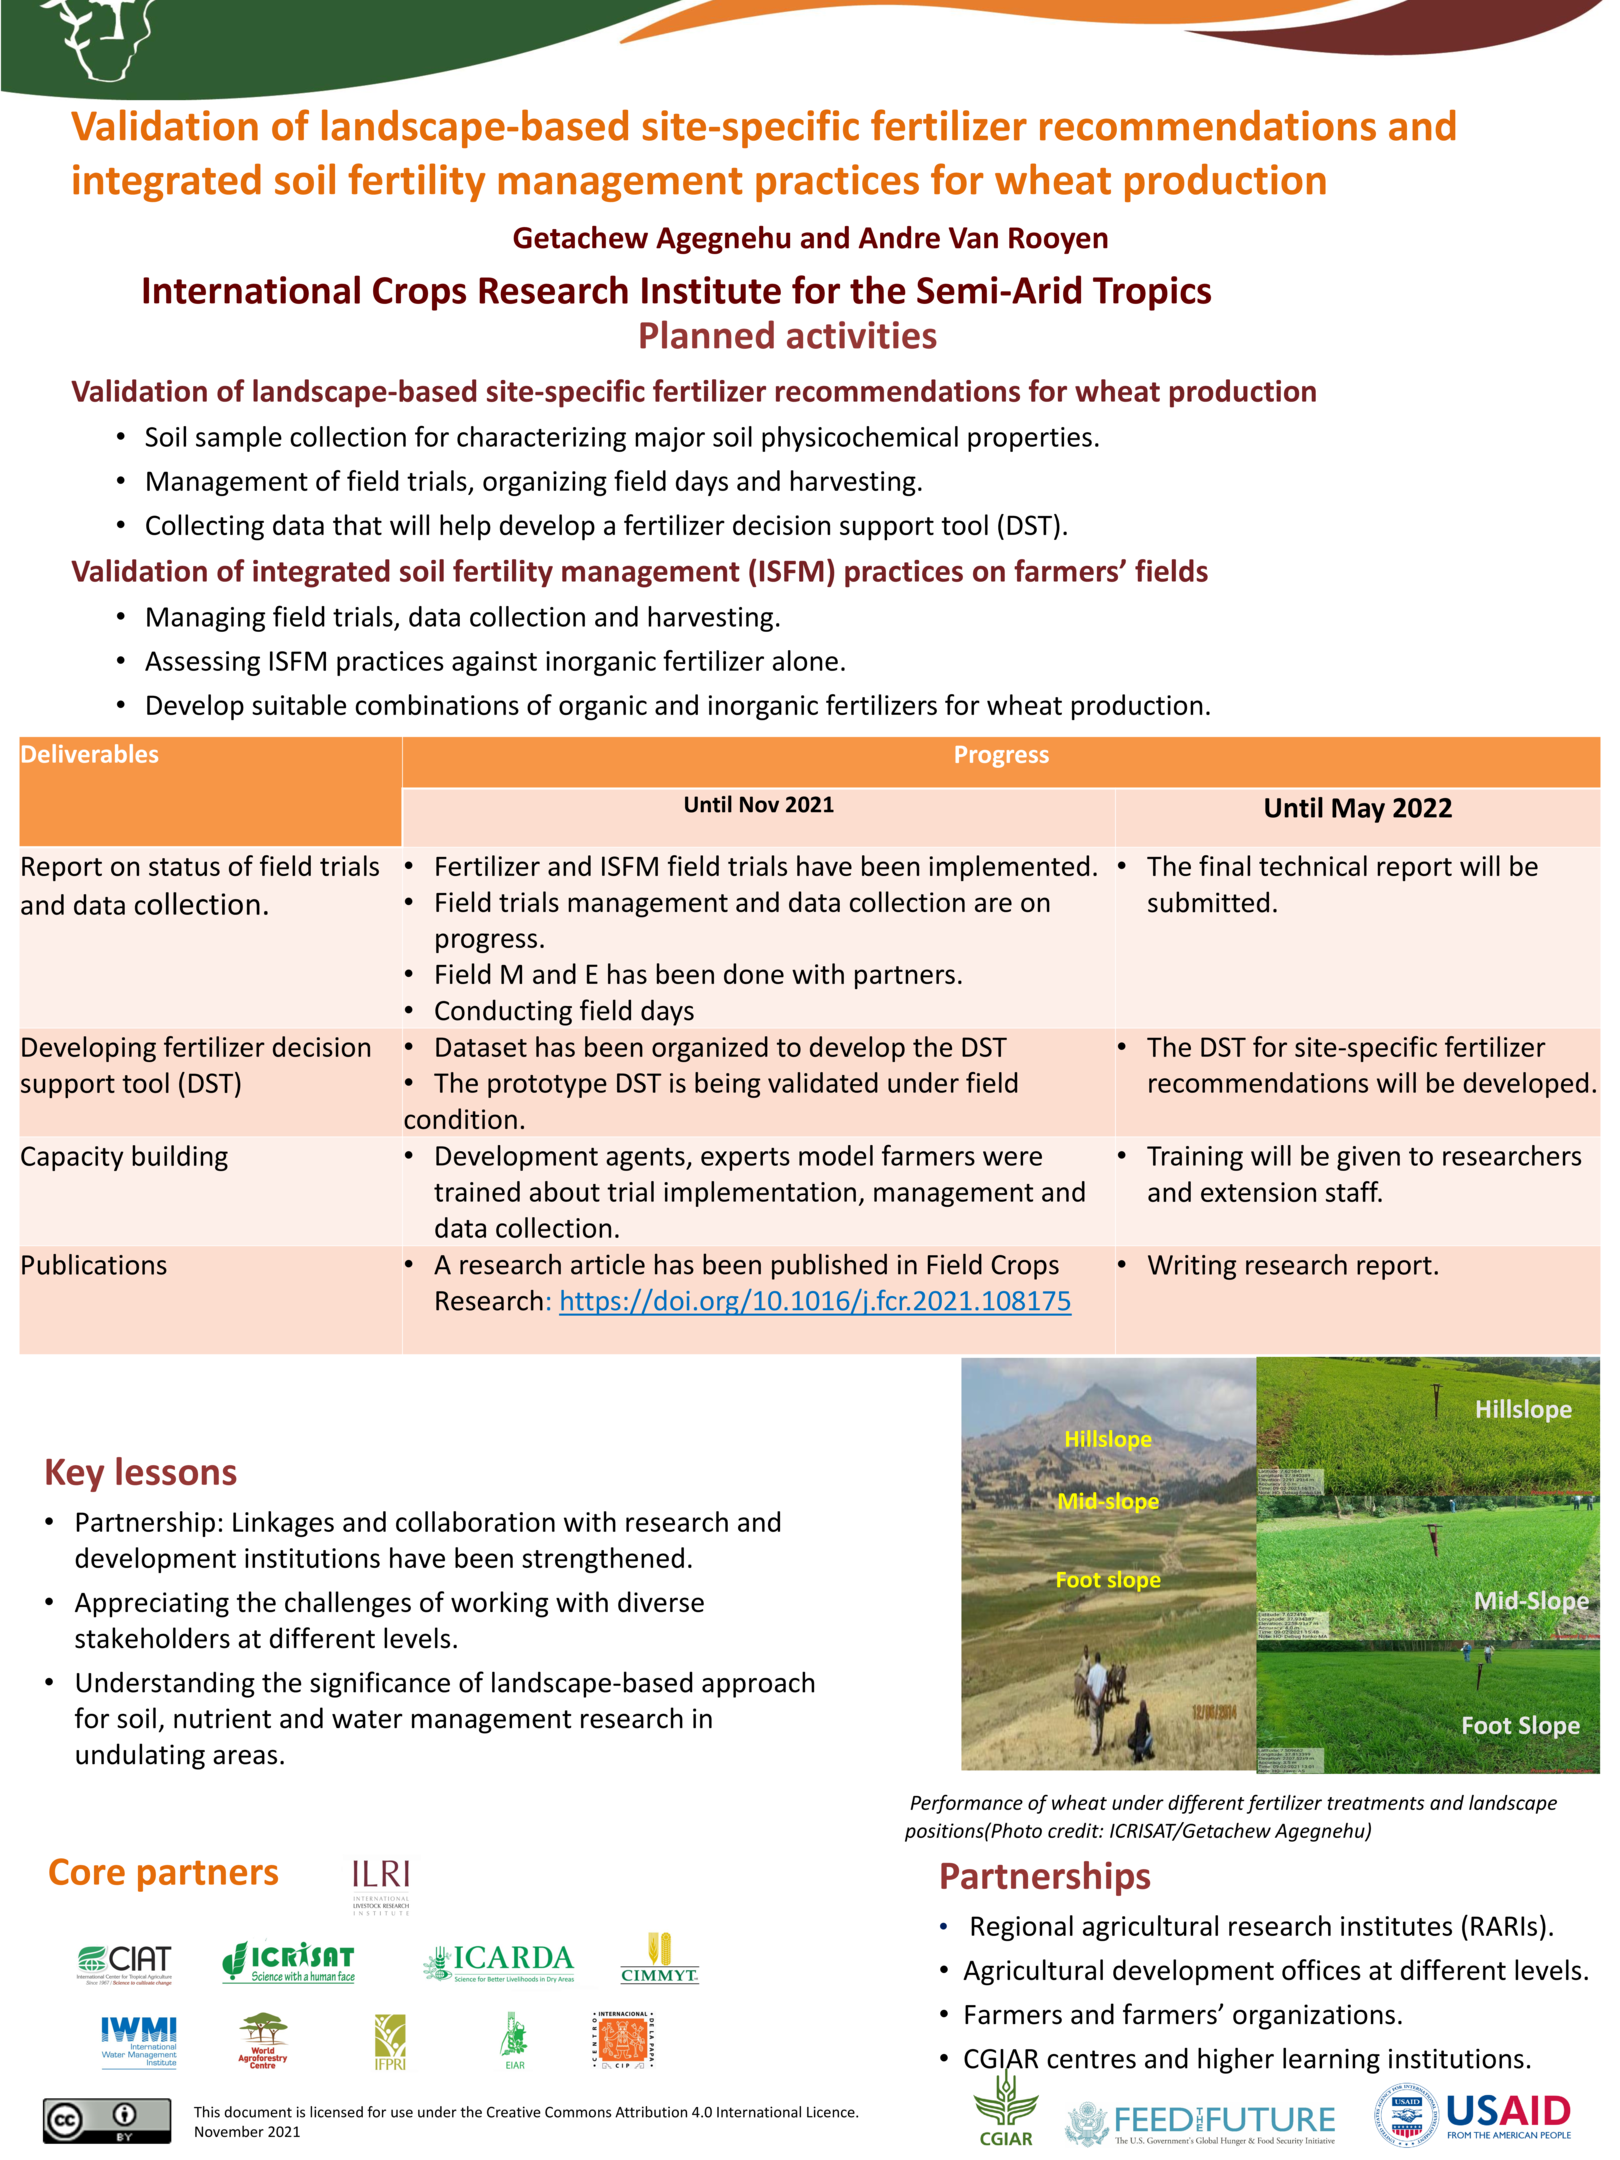 5. Validation of landscape-based site-specific fertilizer recommendations and integrated soil fertility management practices for wheat production  